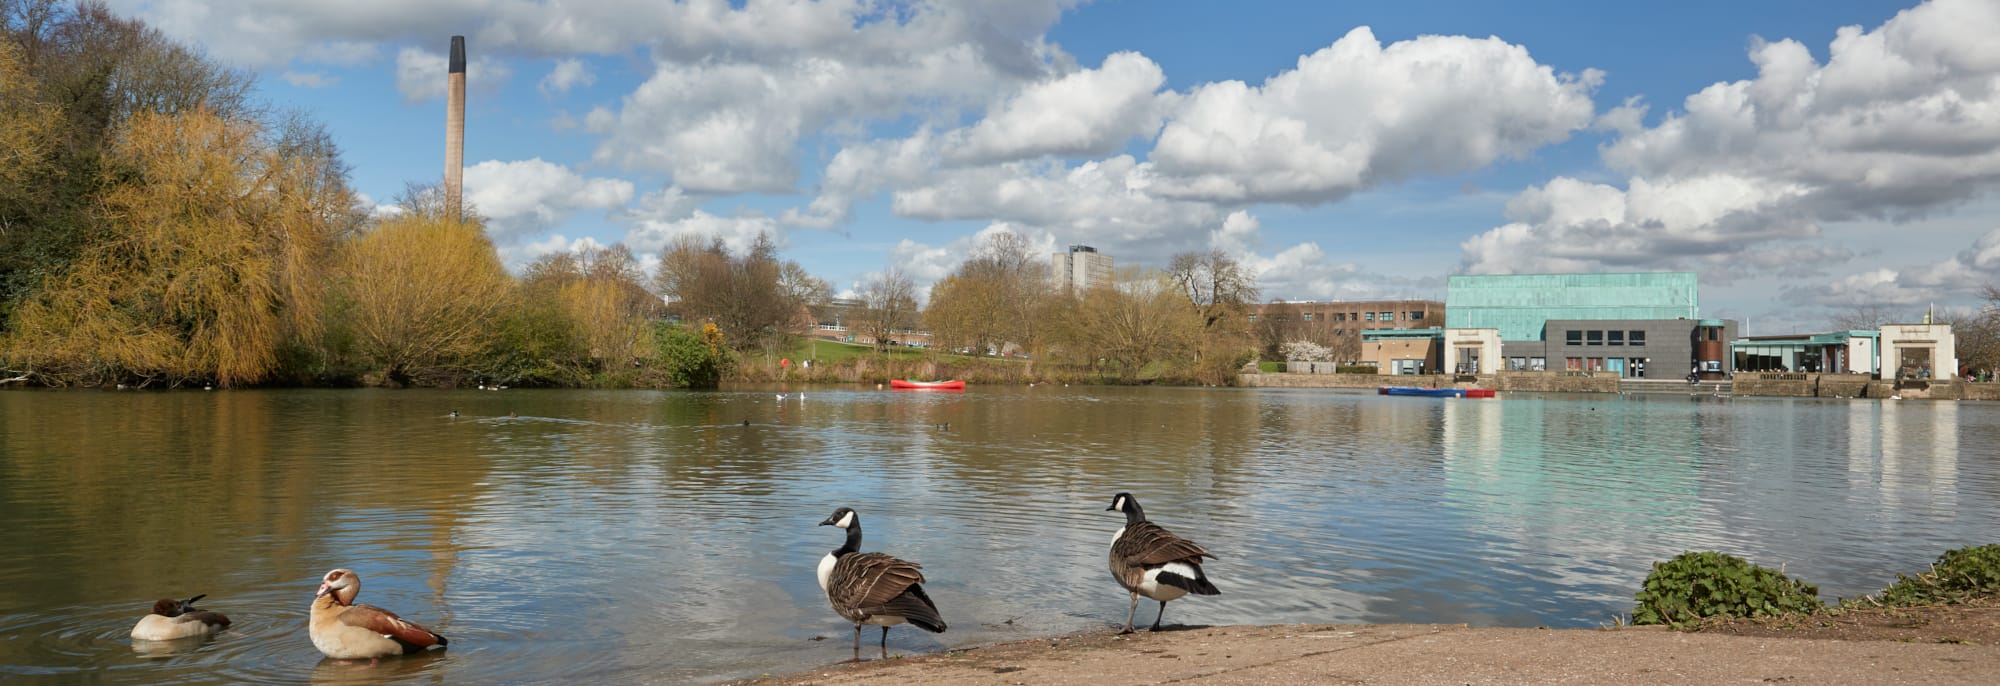 Canada and Egyptian geese stand on the edge of Highfields Park lake, with Lakeside Arts in the background on the far shore of the lake.